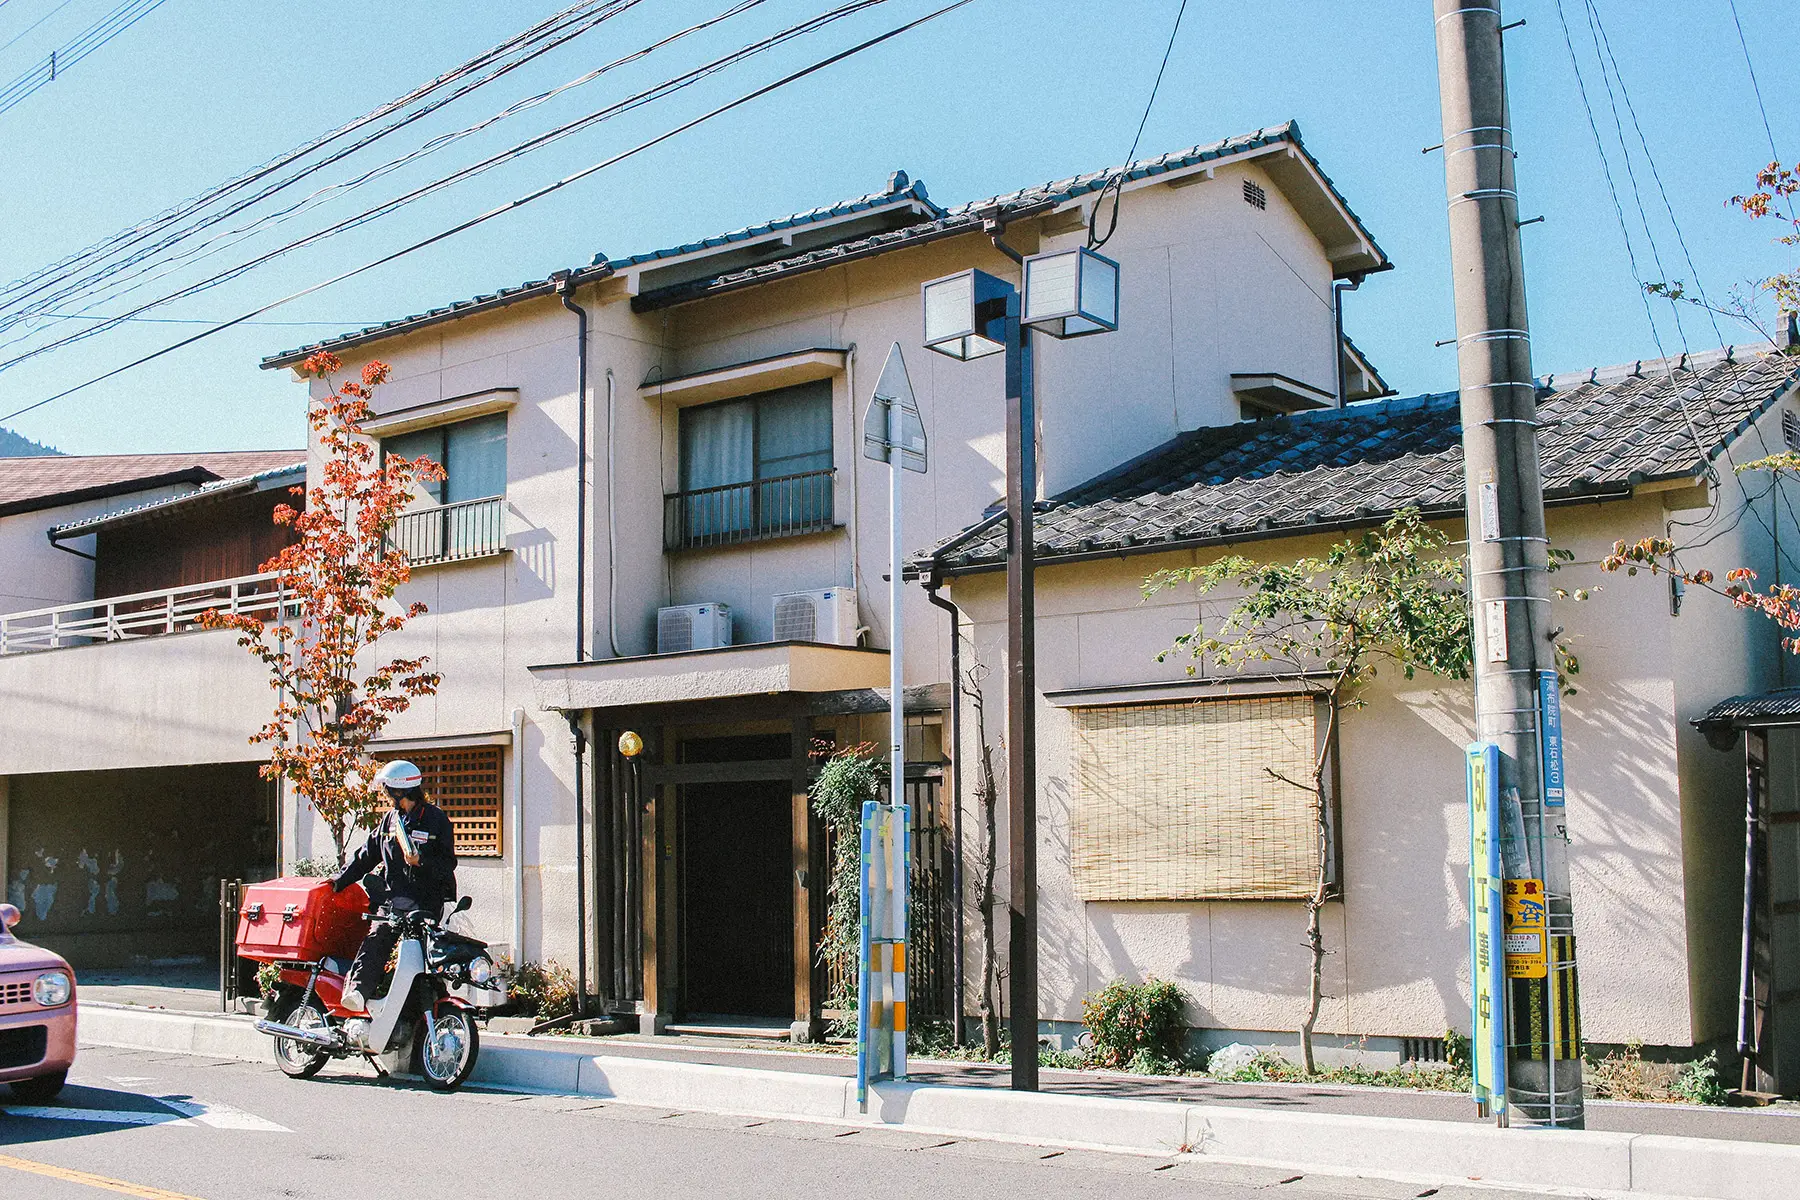 A house with a person on a motorbike in front of it